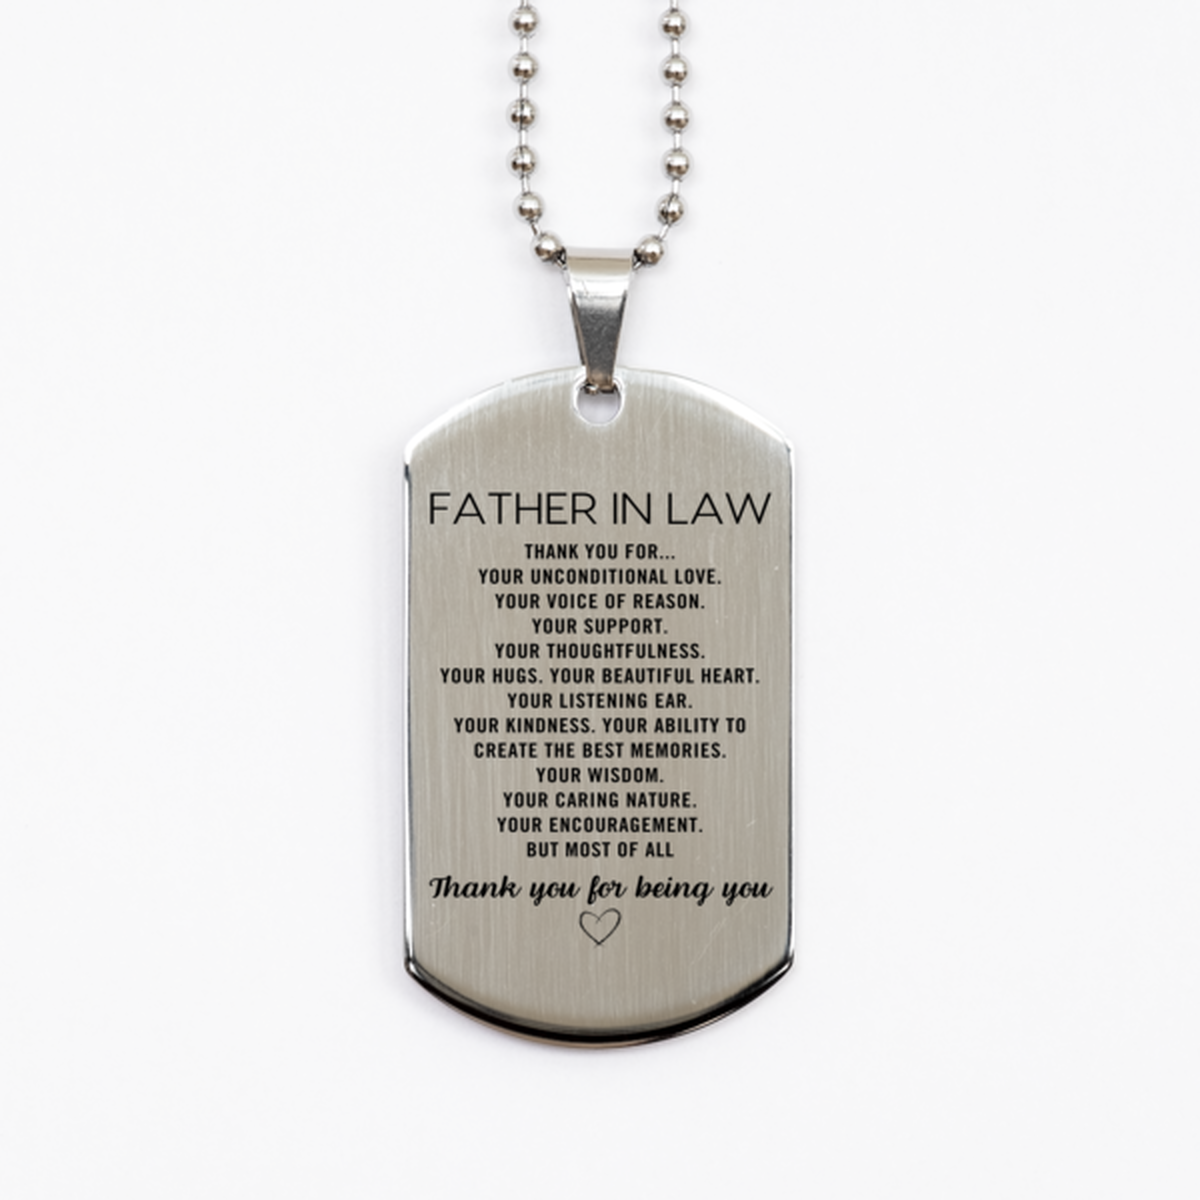 Father In Law Silver Dog Tag Custom, Engraved Gifts For Father In Law Christmas Graduation Birthday Gifts for Men Women Father In Law Thank you for Your unconditional love